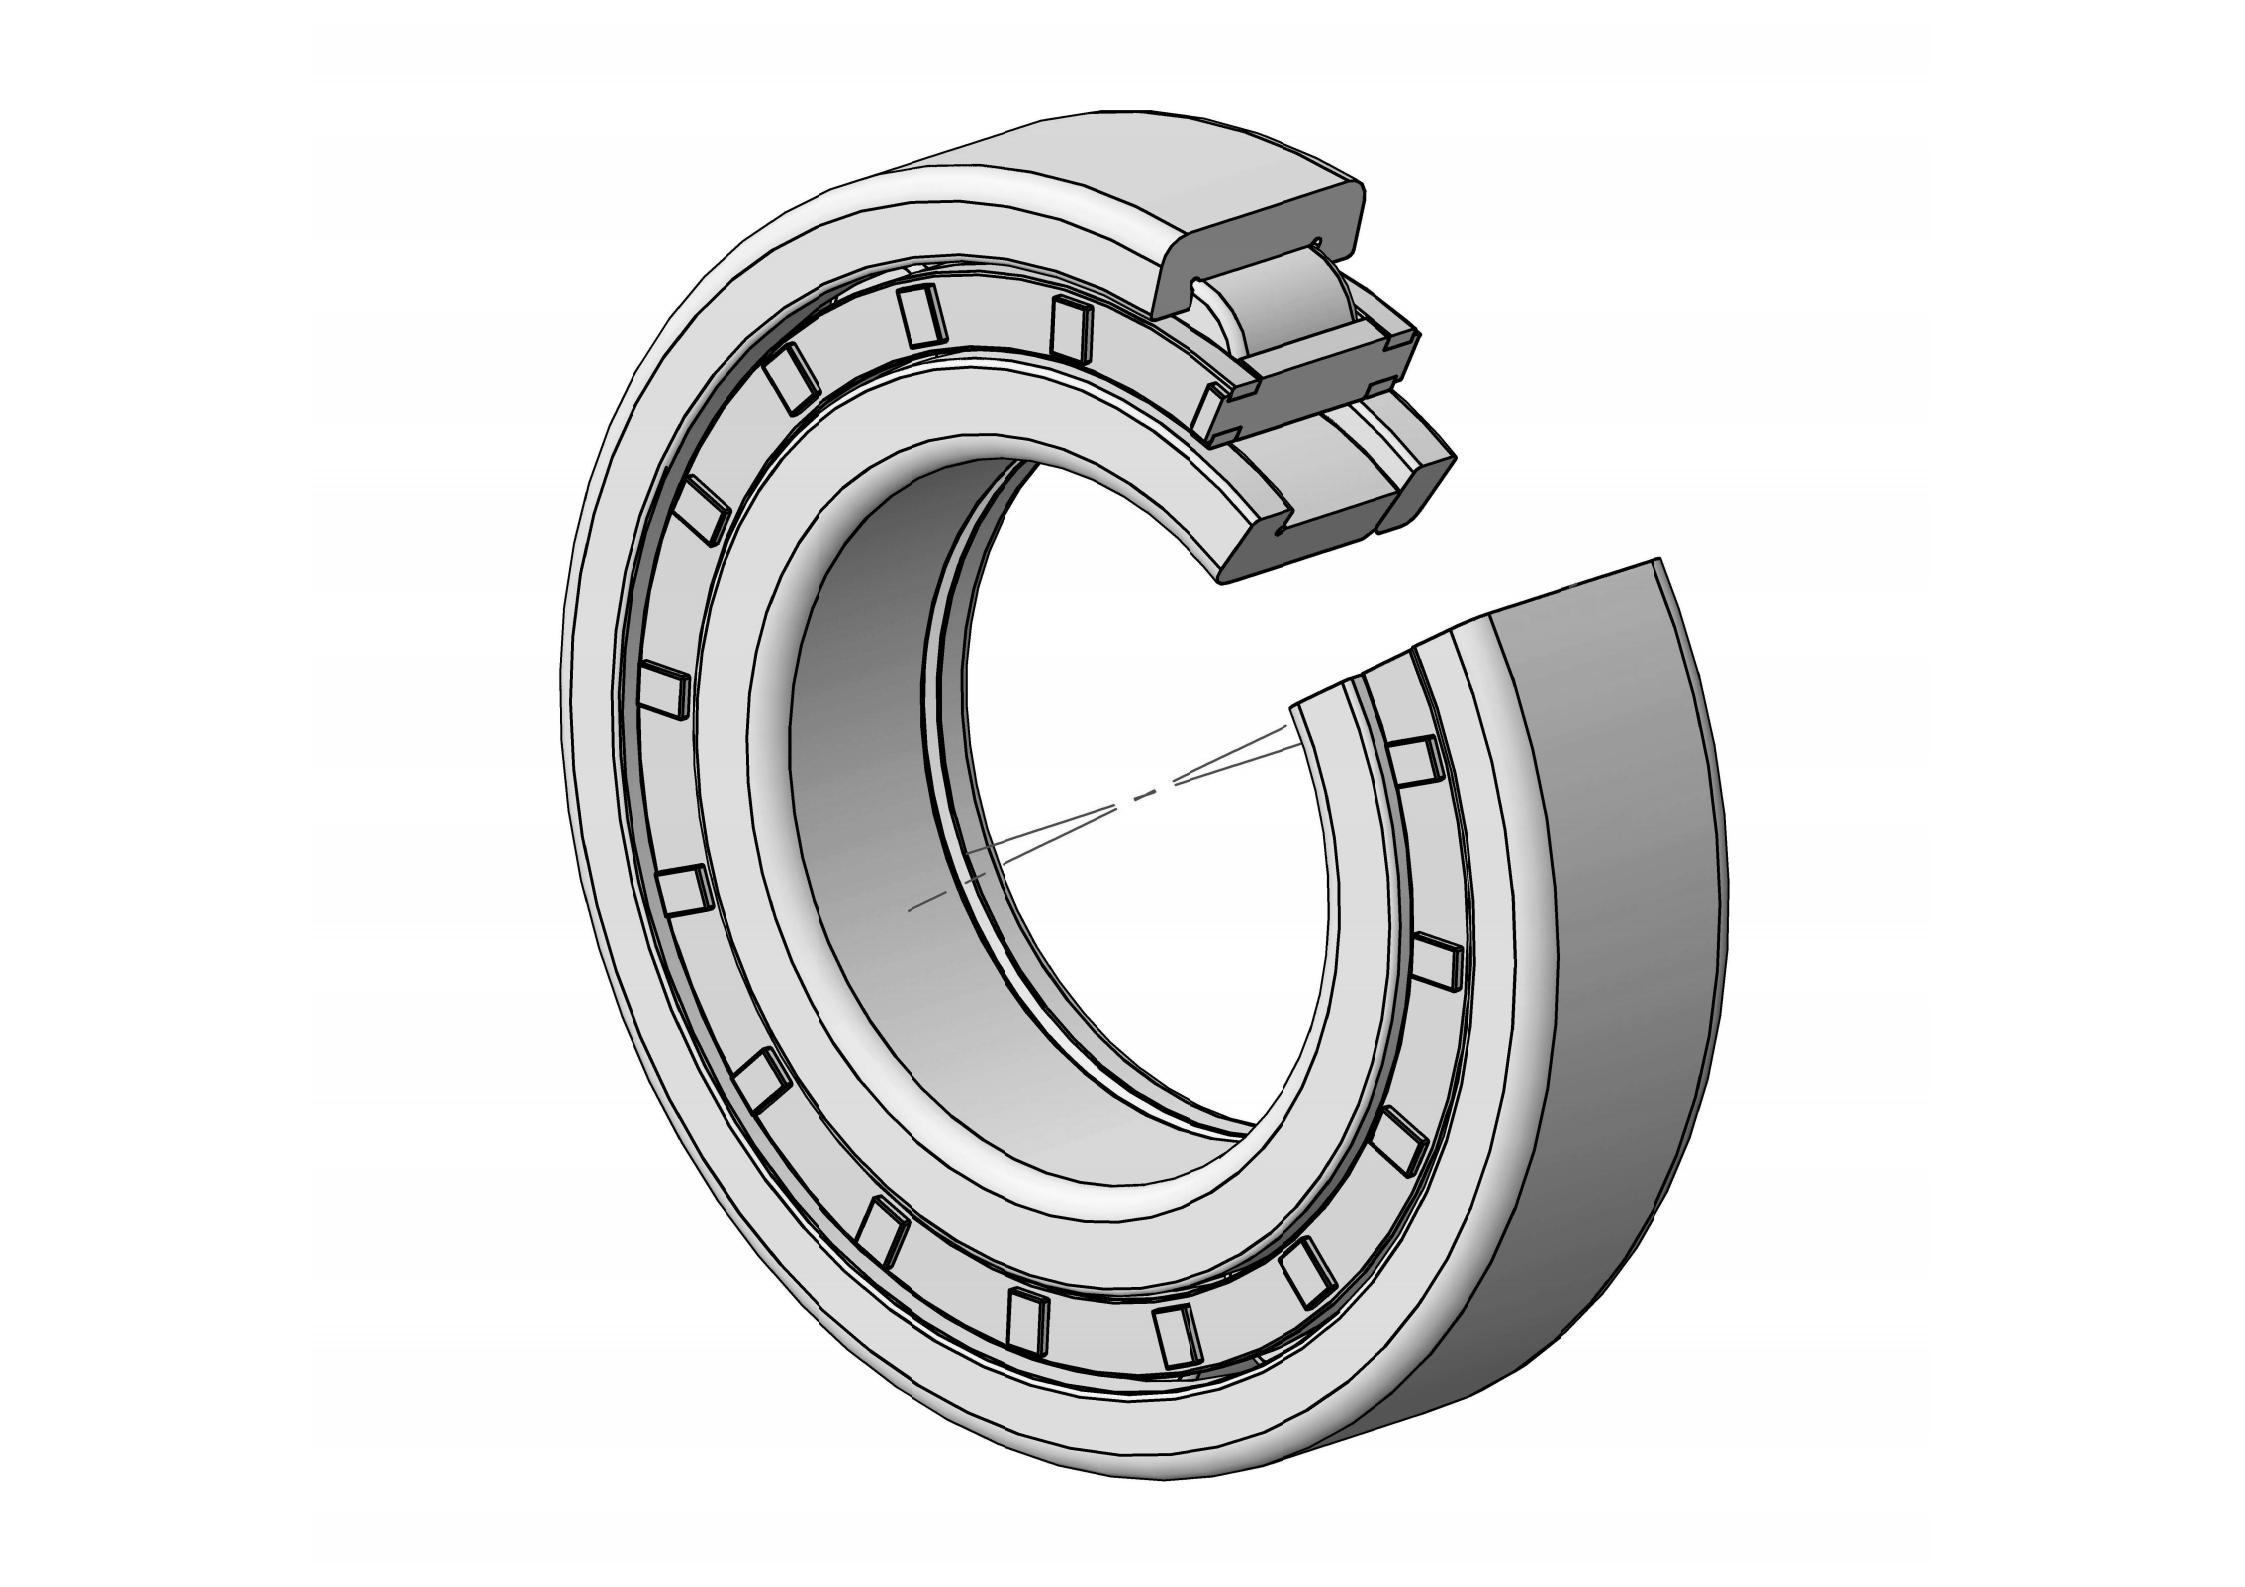 NUP2306-E Single Row Cylindrical roller bearing 